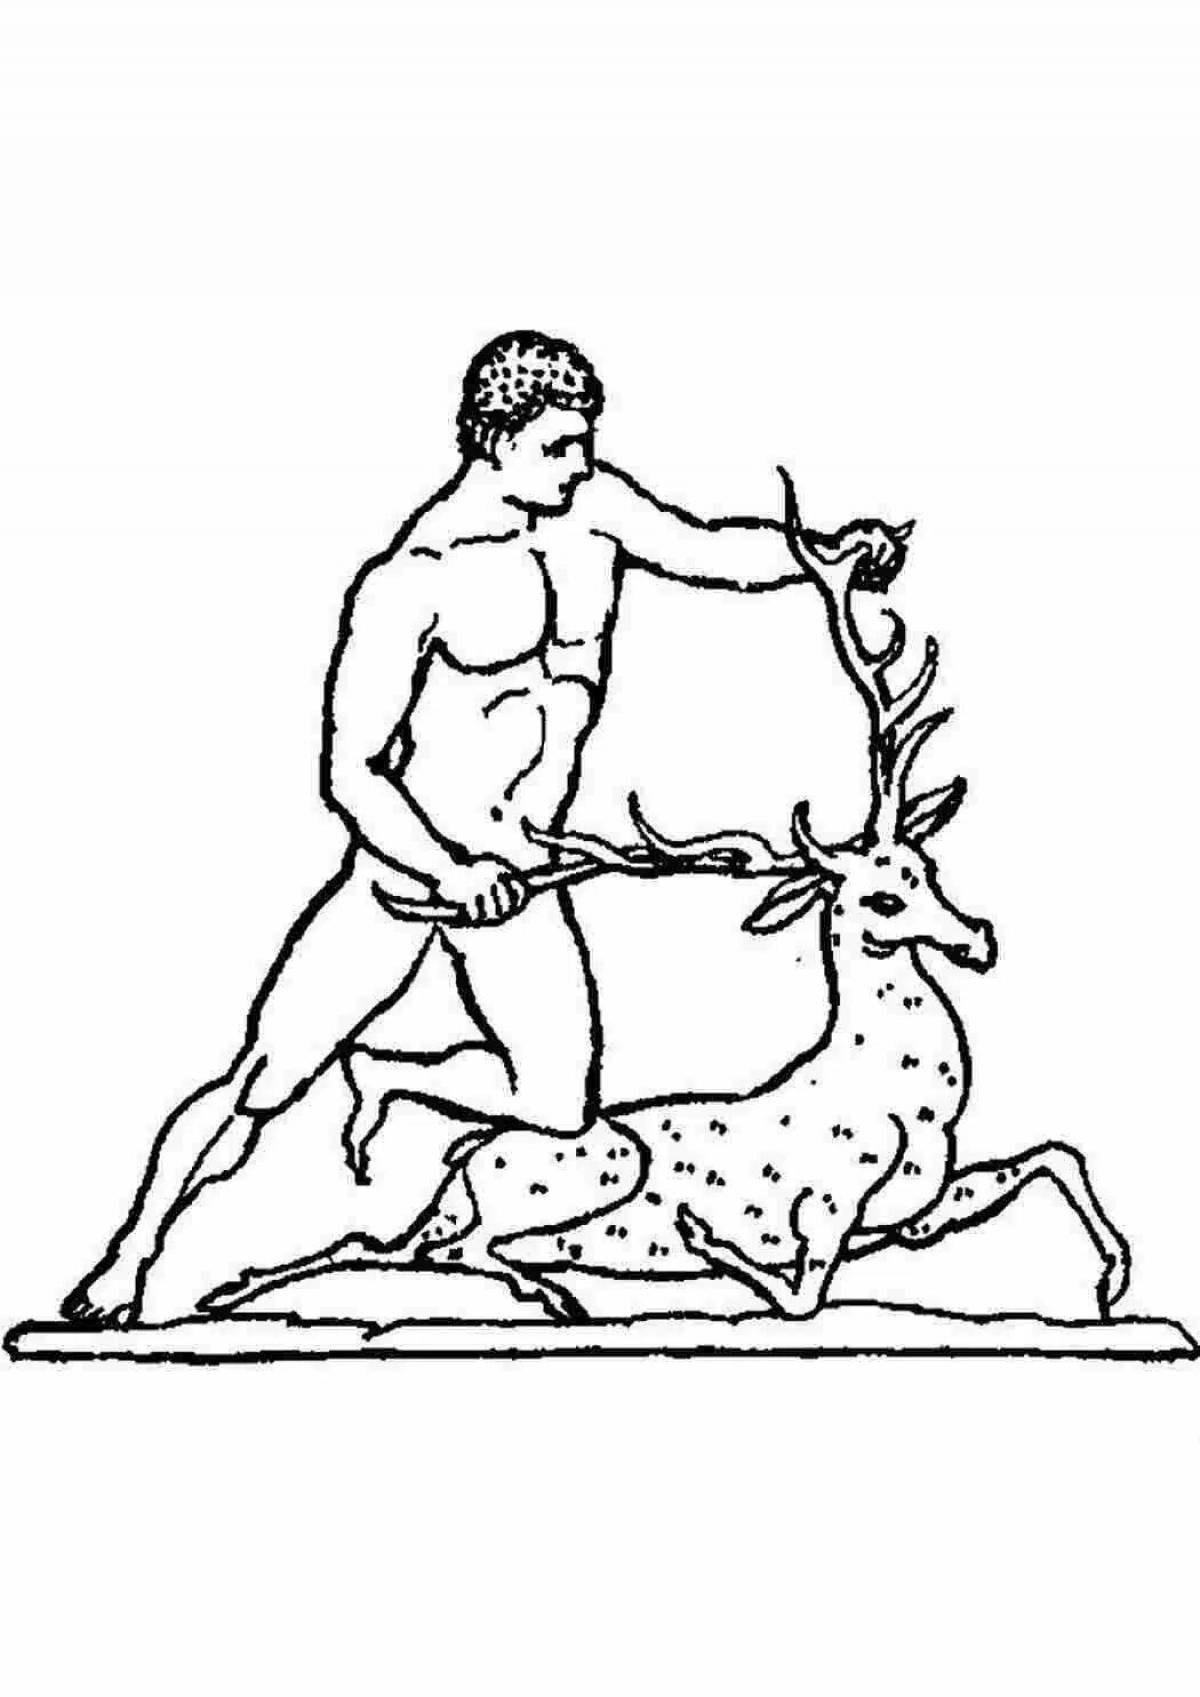 12 Labors of Hercules exquisite coloring pages